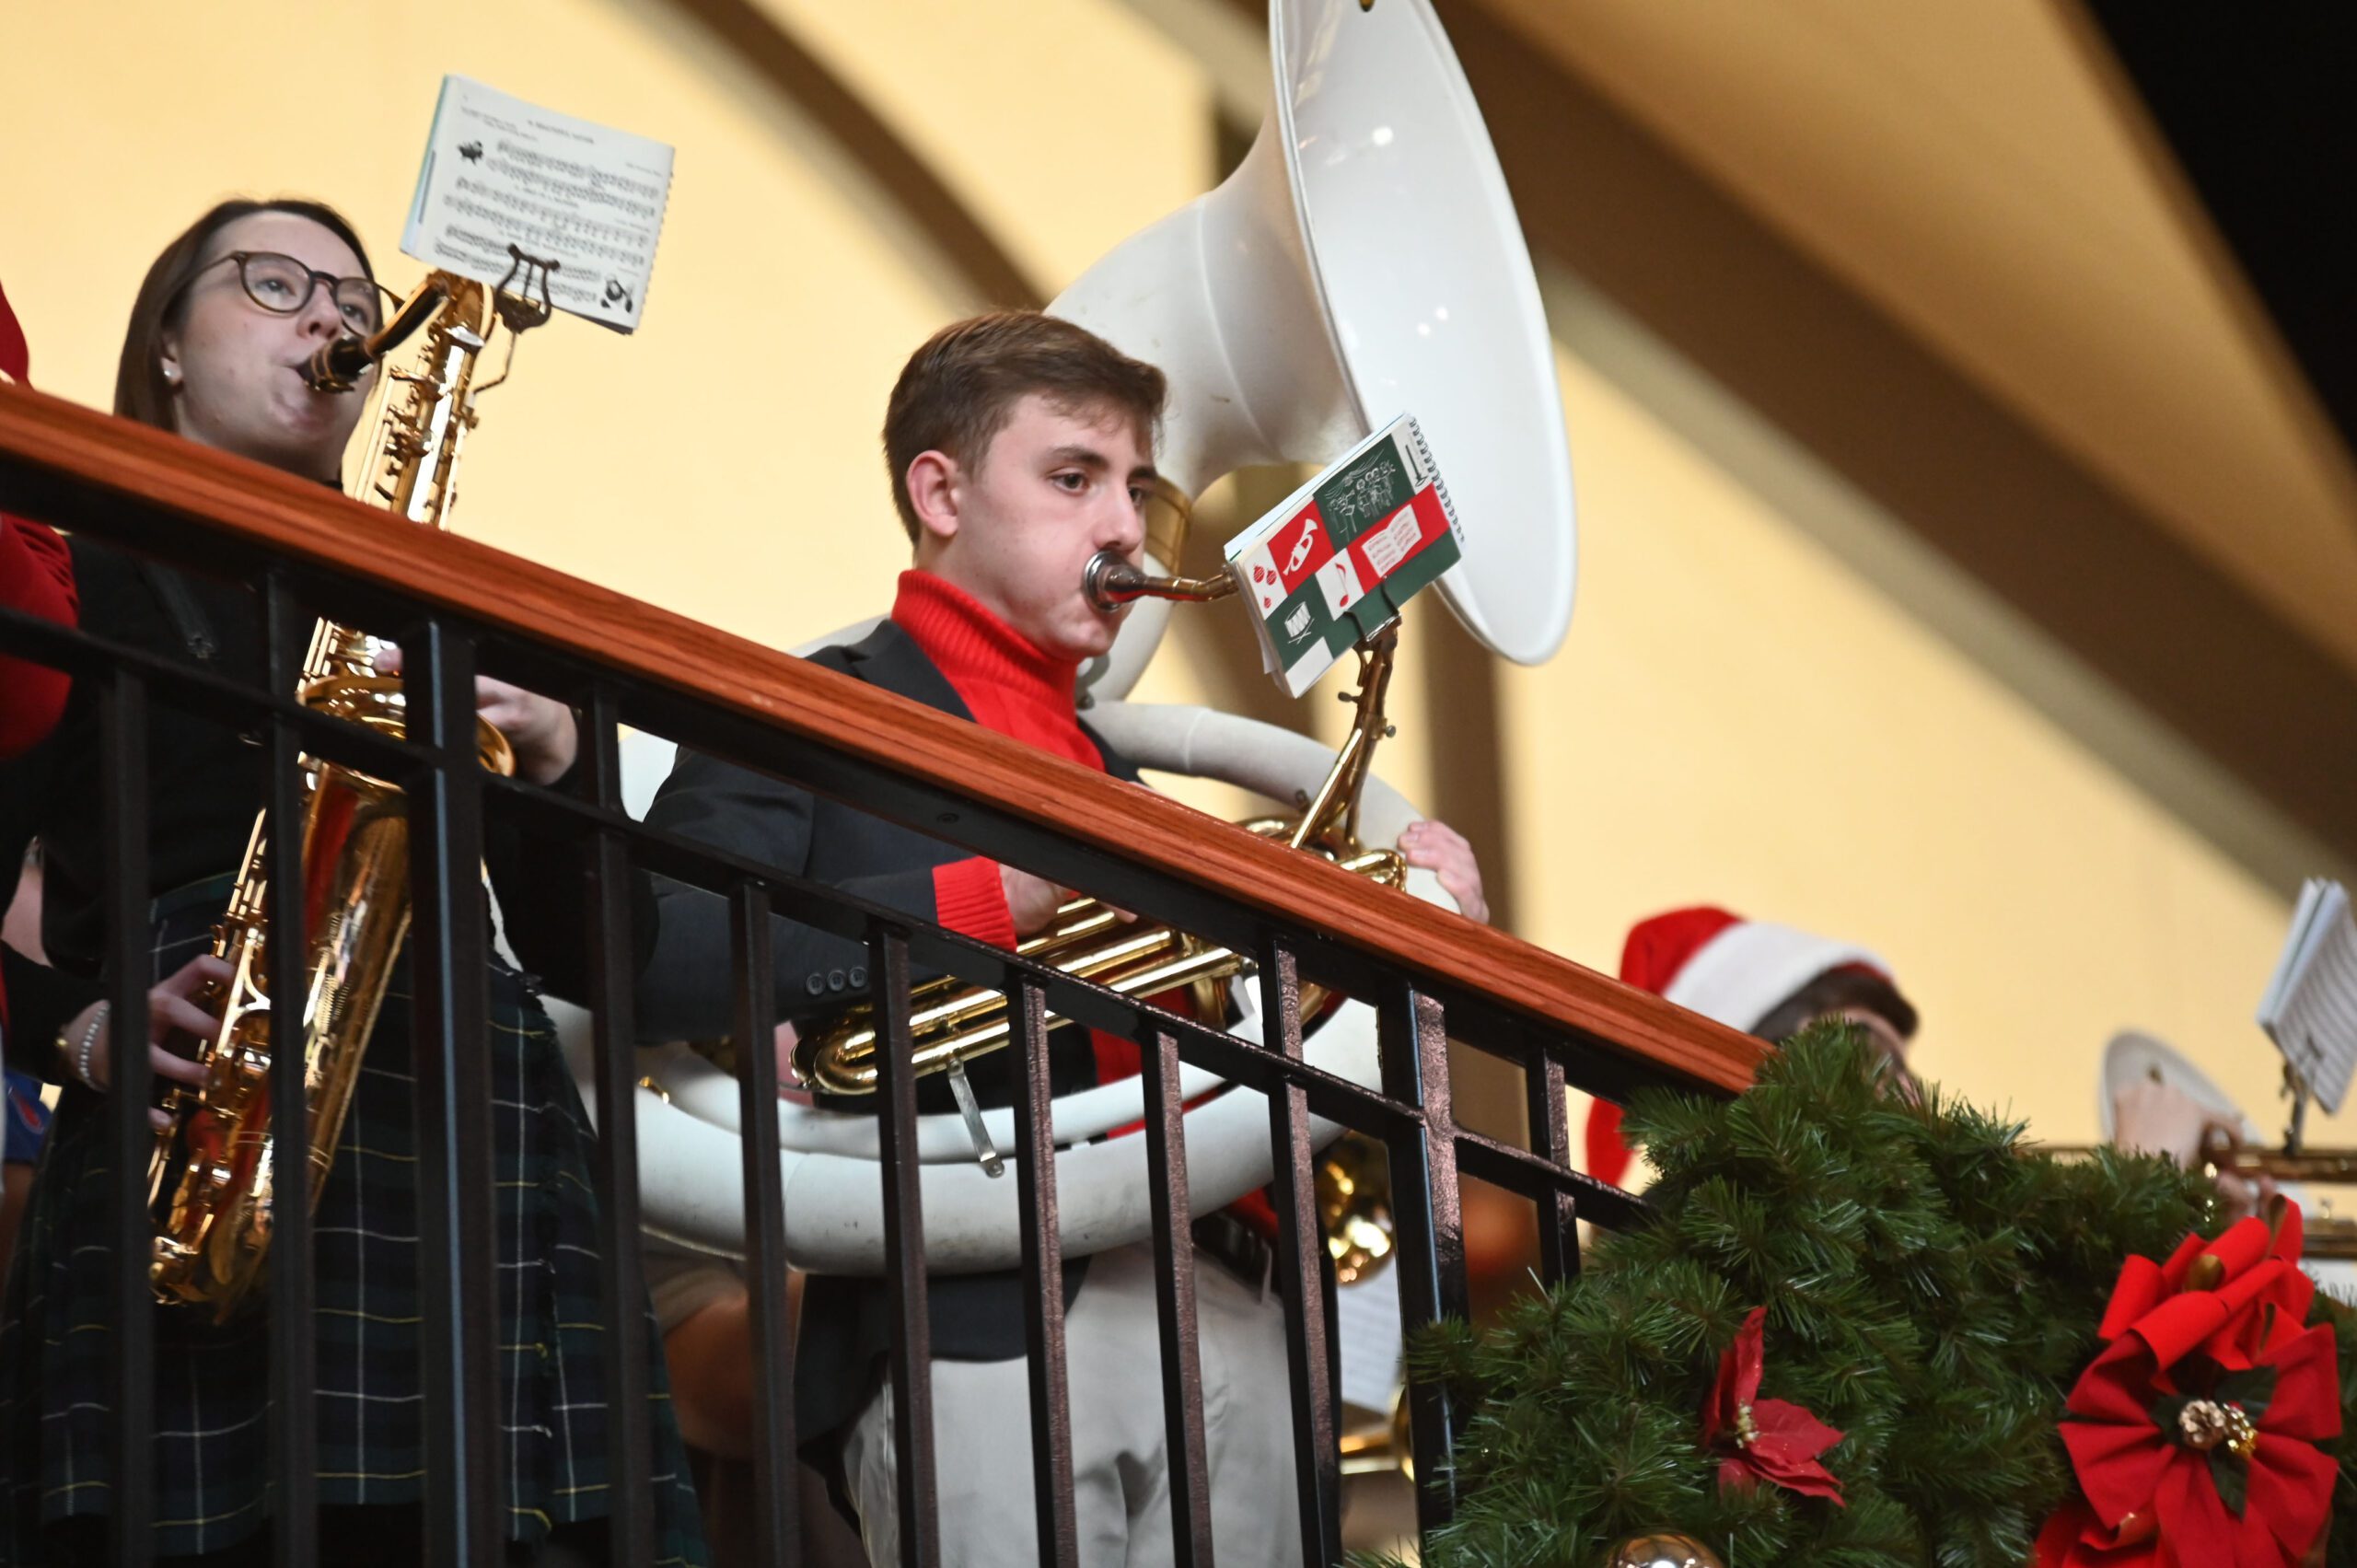 Columbia High School students perform holiday music for travelers at the Joseph L. Bruno Rail Station in Rensselaer on Friday morning.